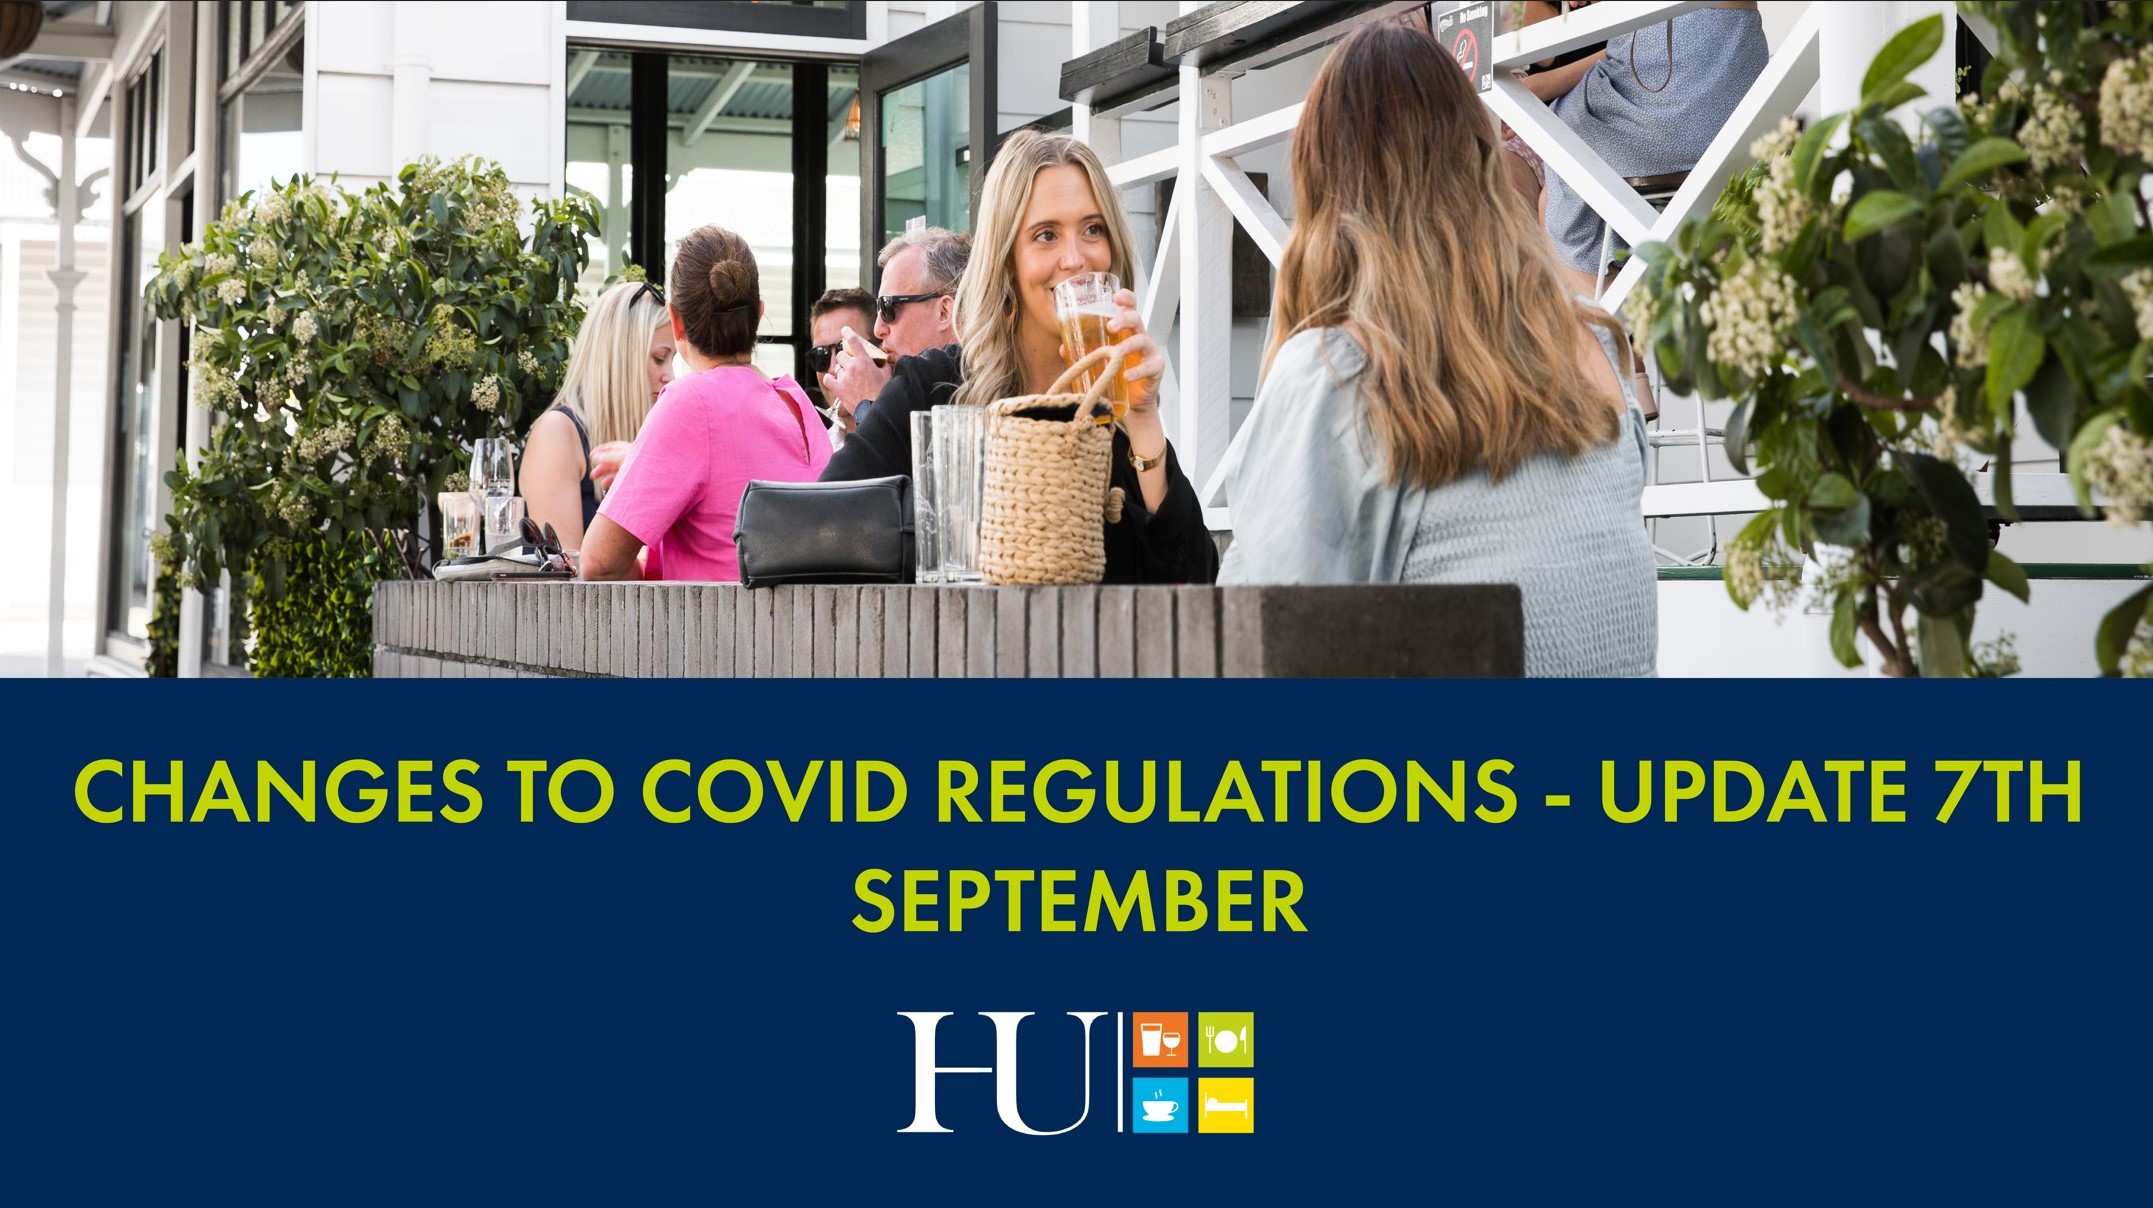 CHANGES TO COVID REGULATIONS - UPDATE 7th SEPTEMBER